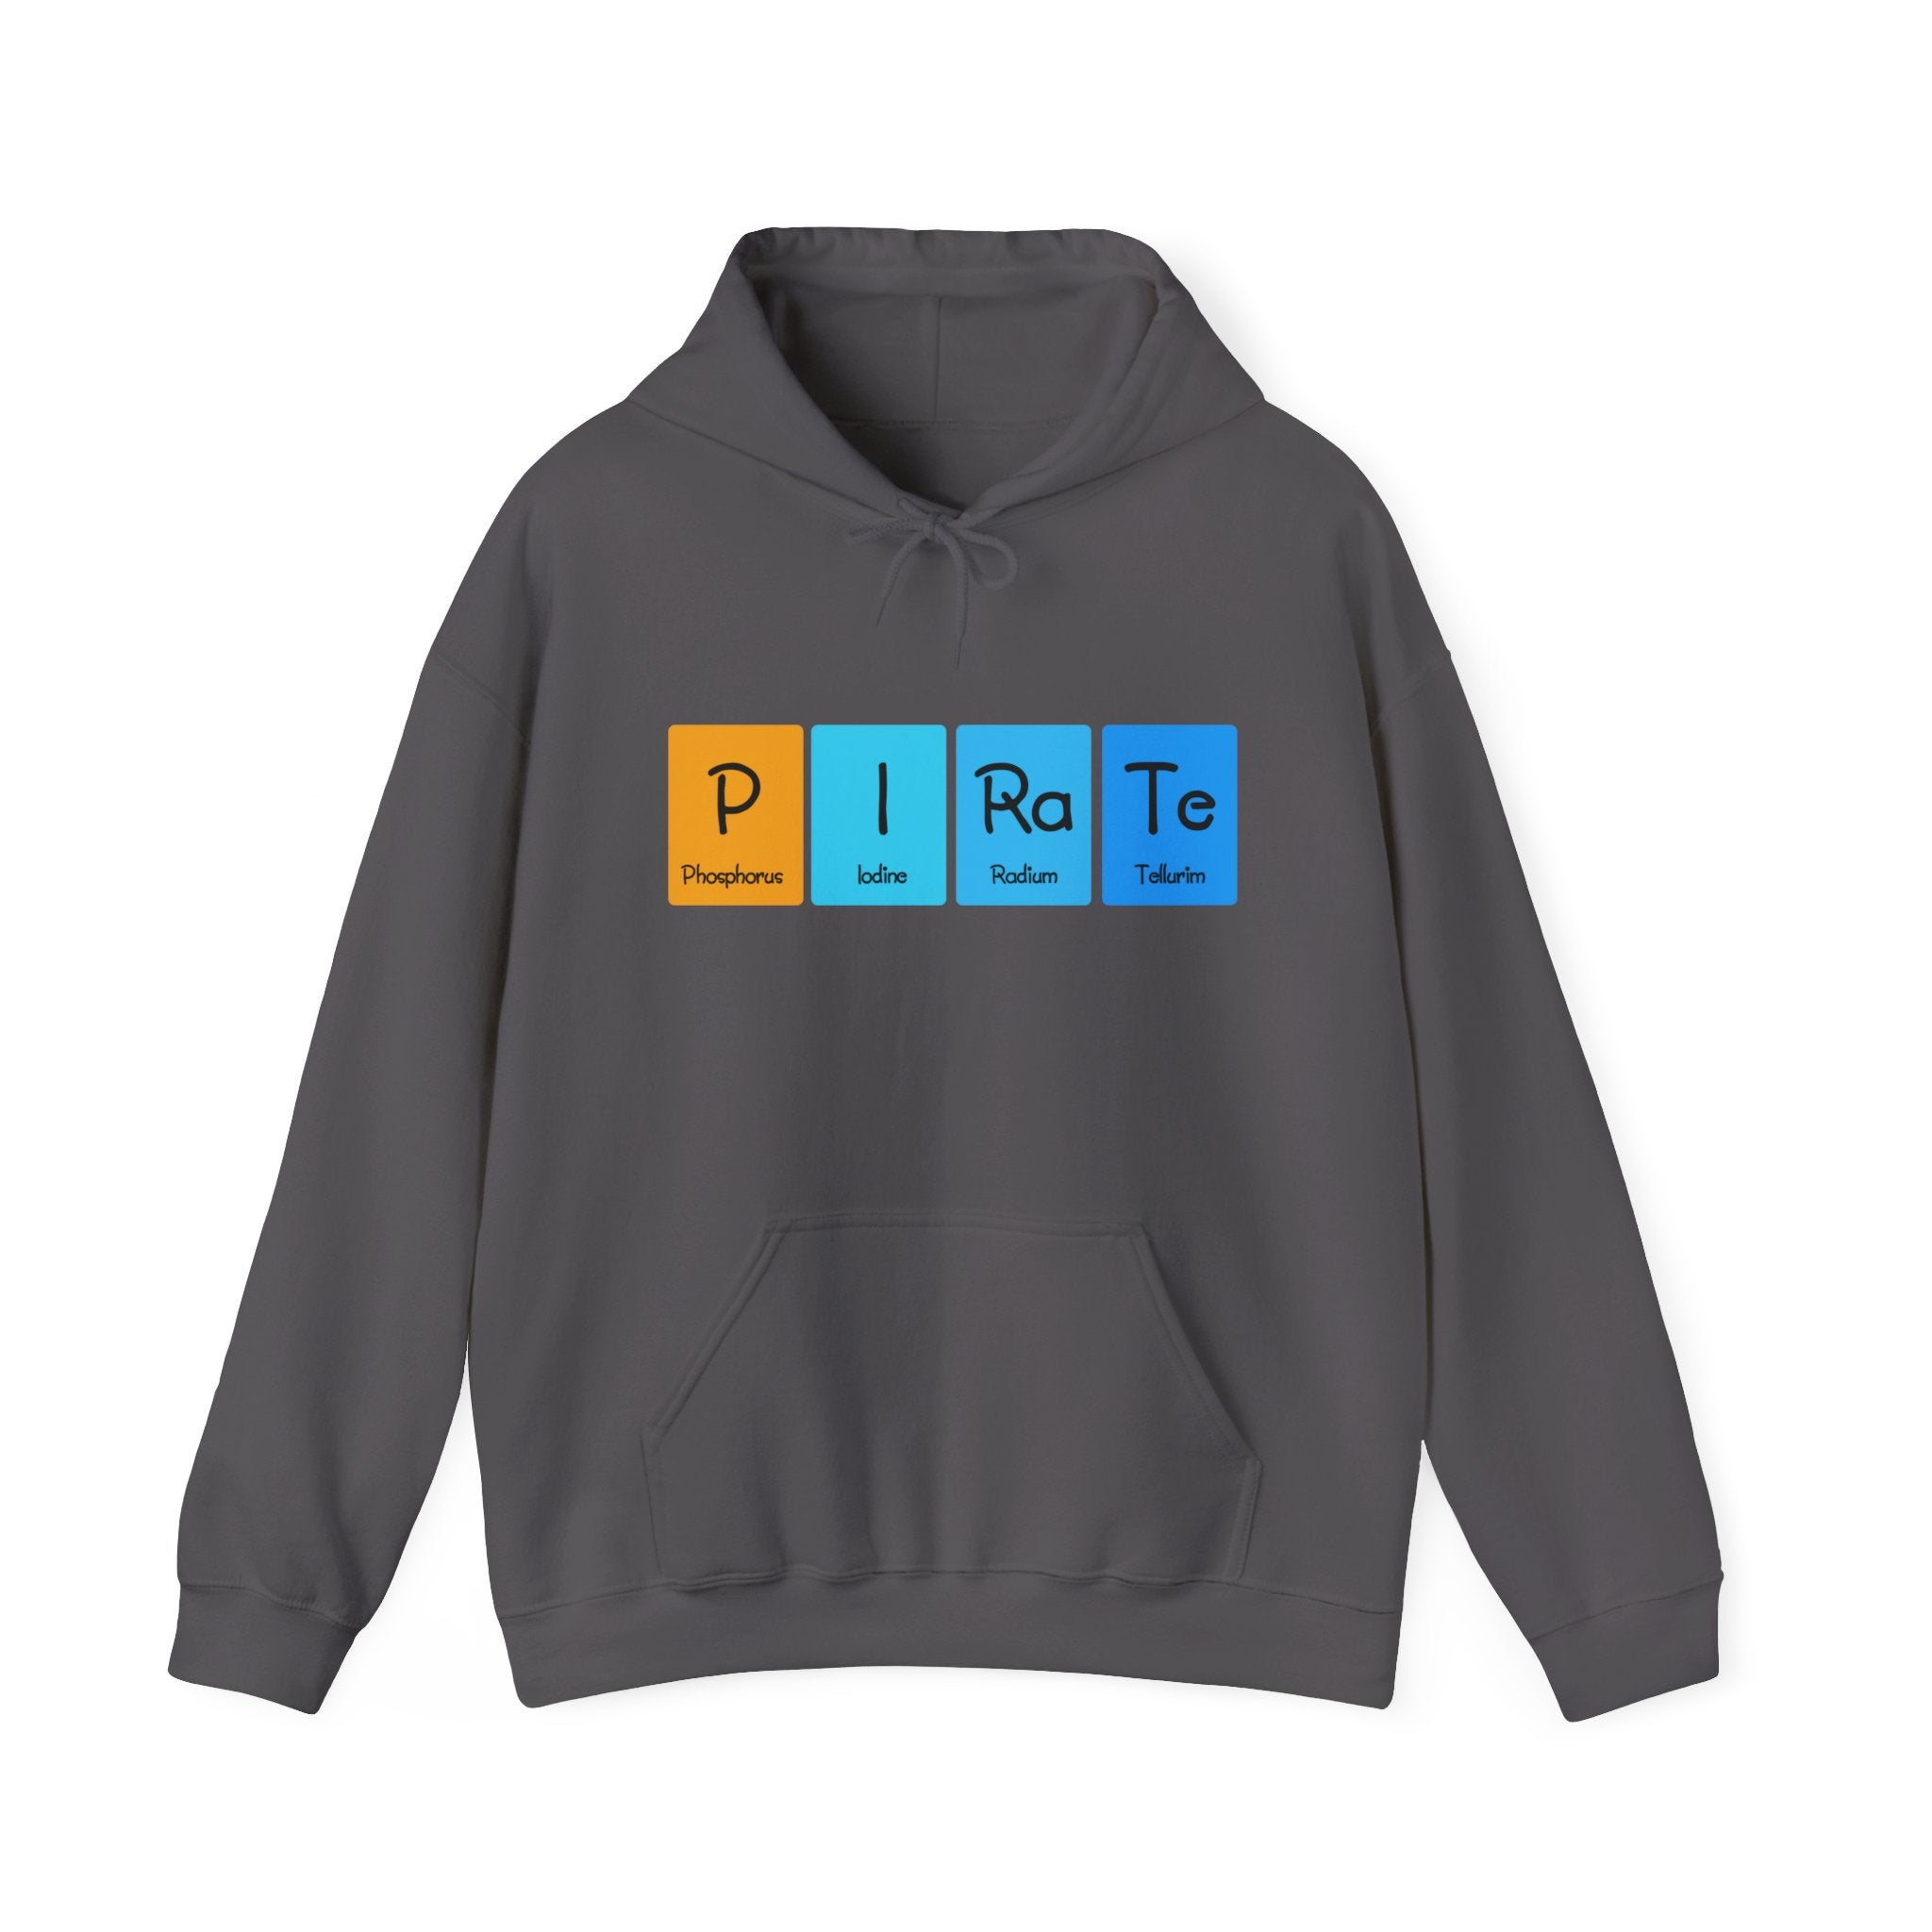 This dark grey P-I-Ra-Te - Hooded Sweatshirt combines comfort and style with a unique design featuring the word "PIRATE" using elements from the periodic table: Phosphorus (P), Iodine (I), Radium (Ra), and Tellurium (Te). Perfect for any adventurer.